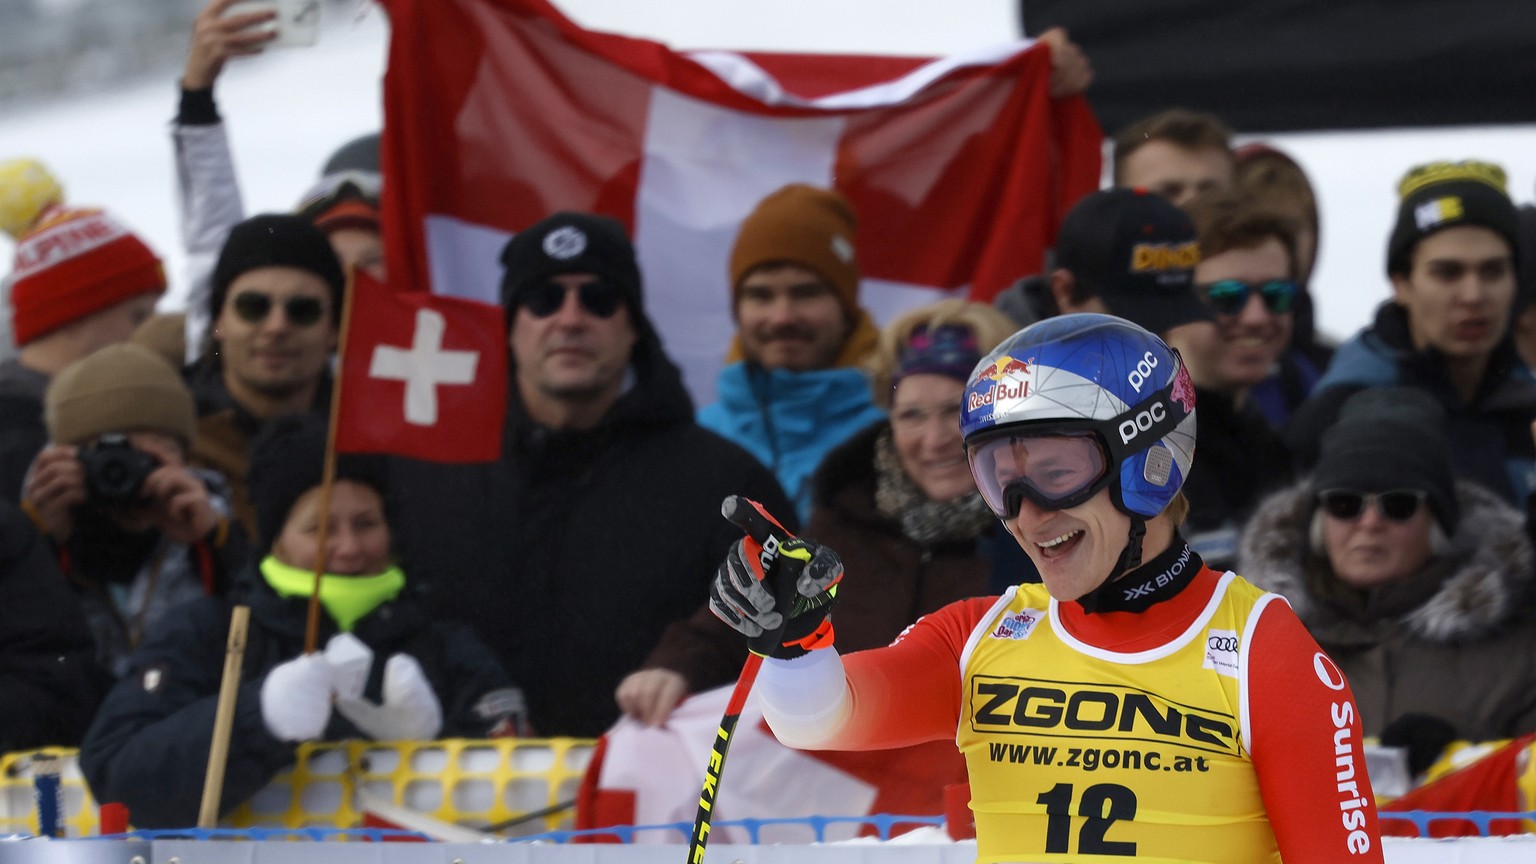 Switzerland's Marco Odermatt reacts in the finish area during the men's downhill ski race at the FIS Alpine Skiing World Cup in Lake Louise, Alberta, Saturday, Nov. 26, 2022. (Jeff McIntosh/The Canadi ...